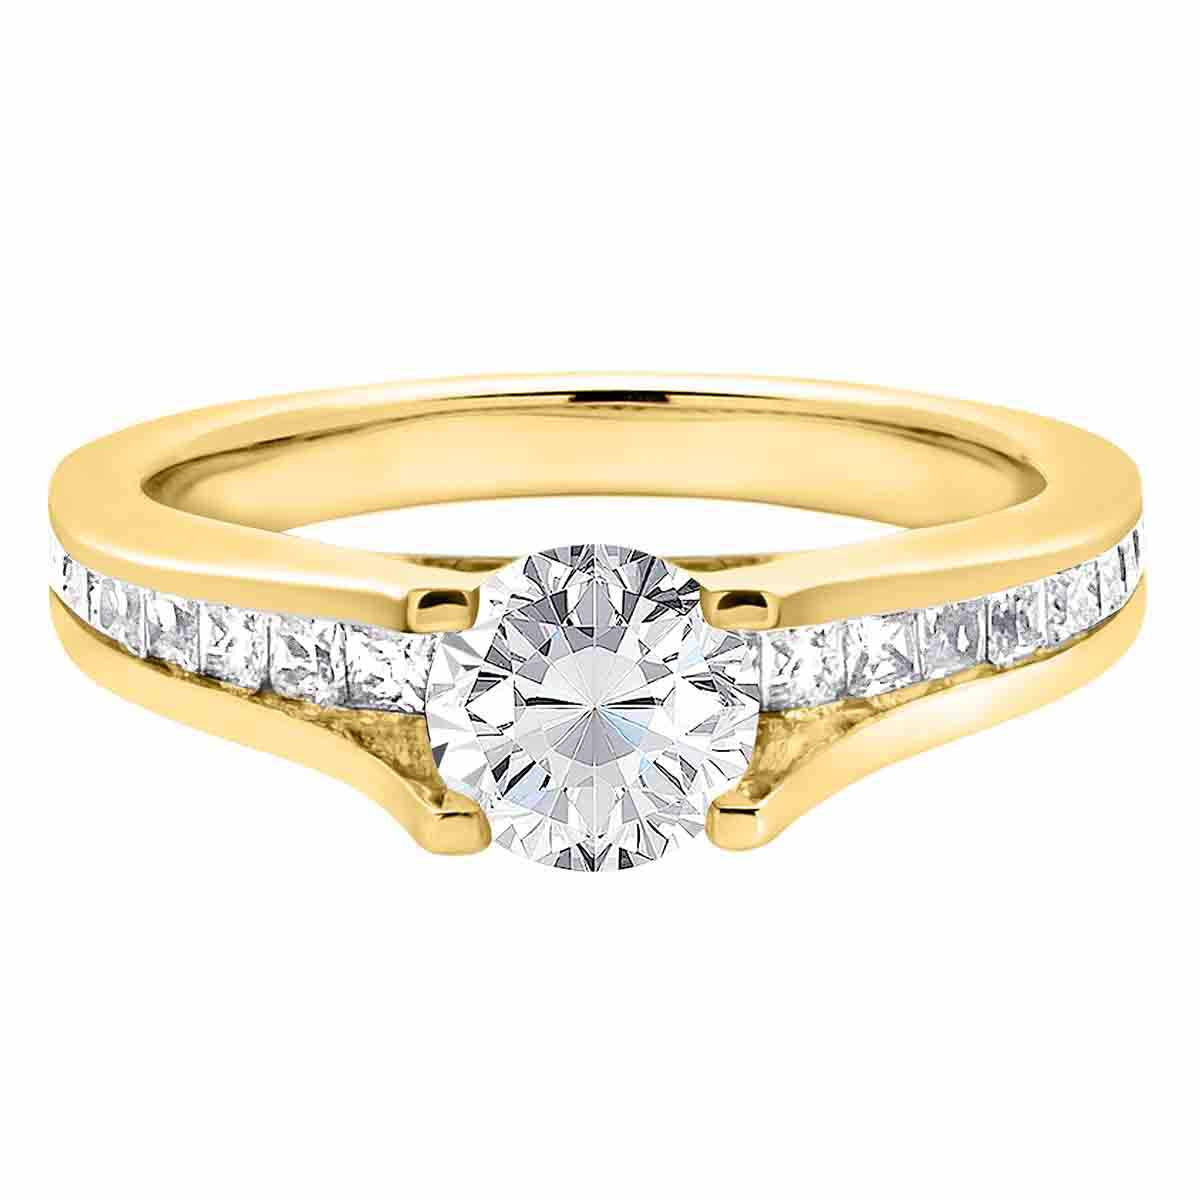 Channel Set Diamond Ring set in yellow gold